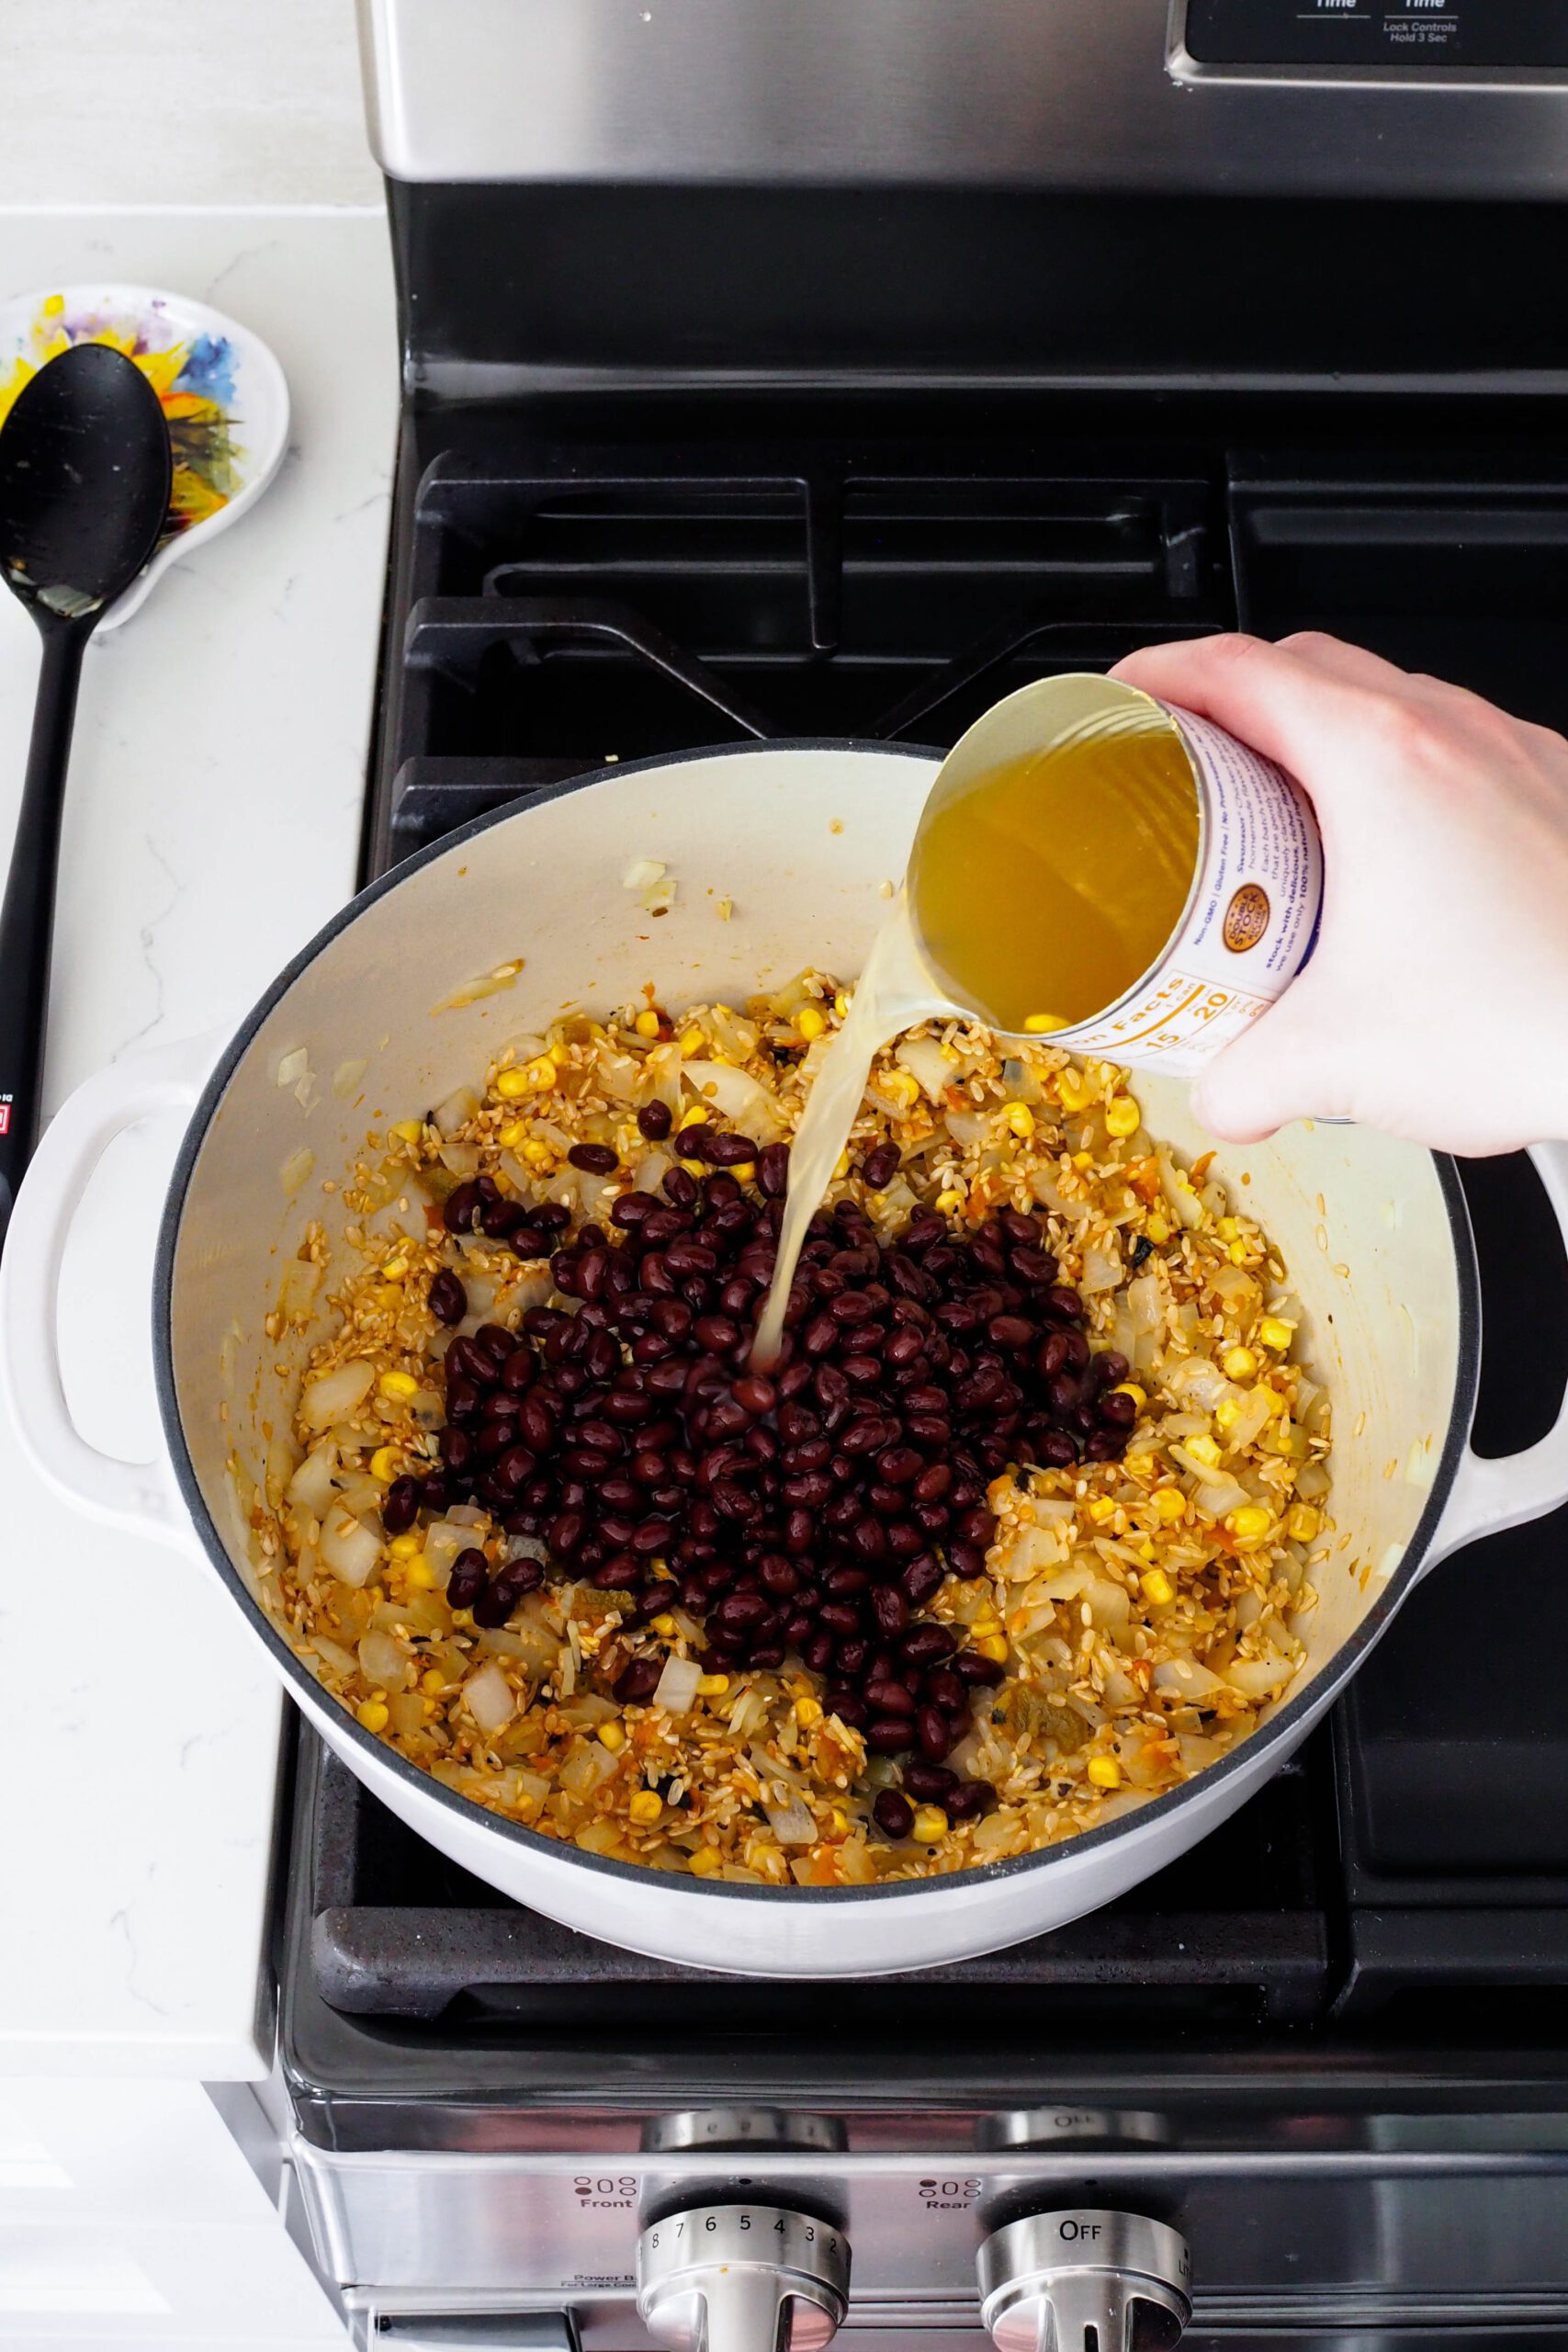 Chicken broth is poured into a Dutch oven filled with rice, corn, and beans.